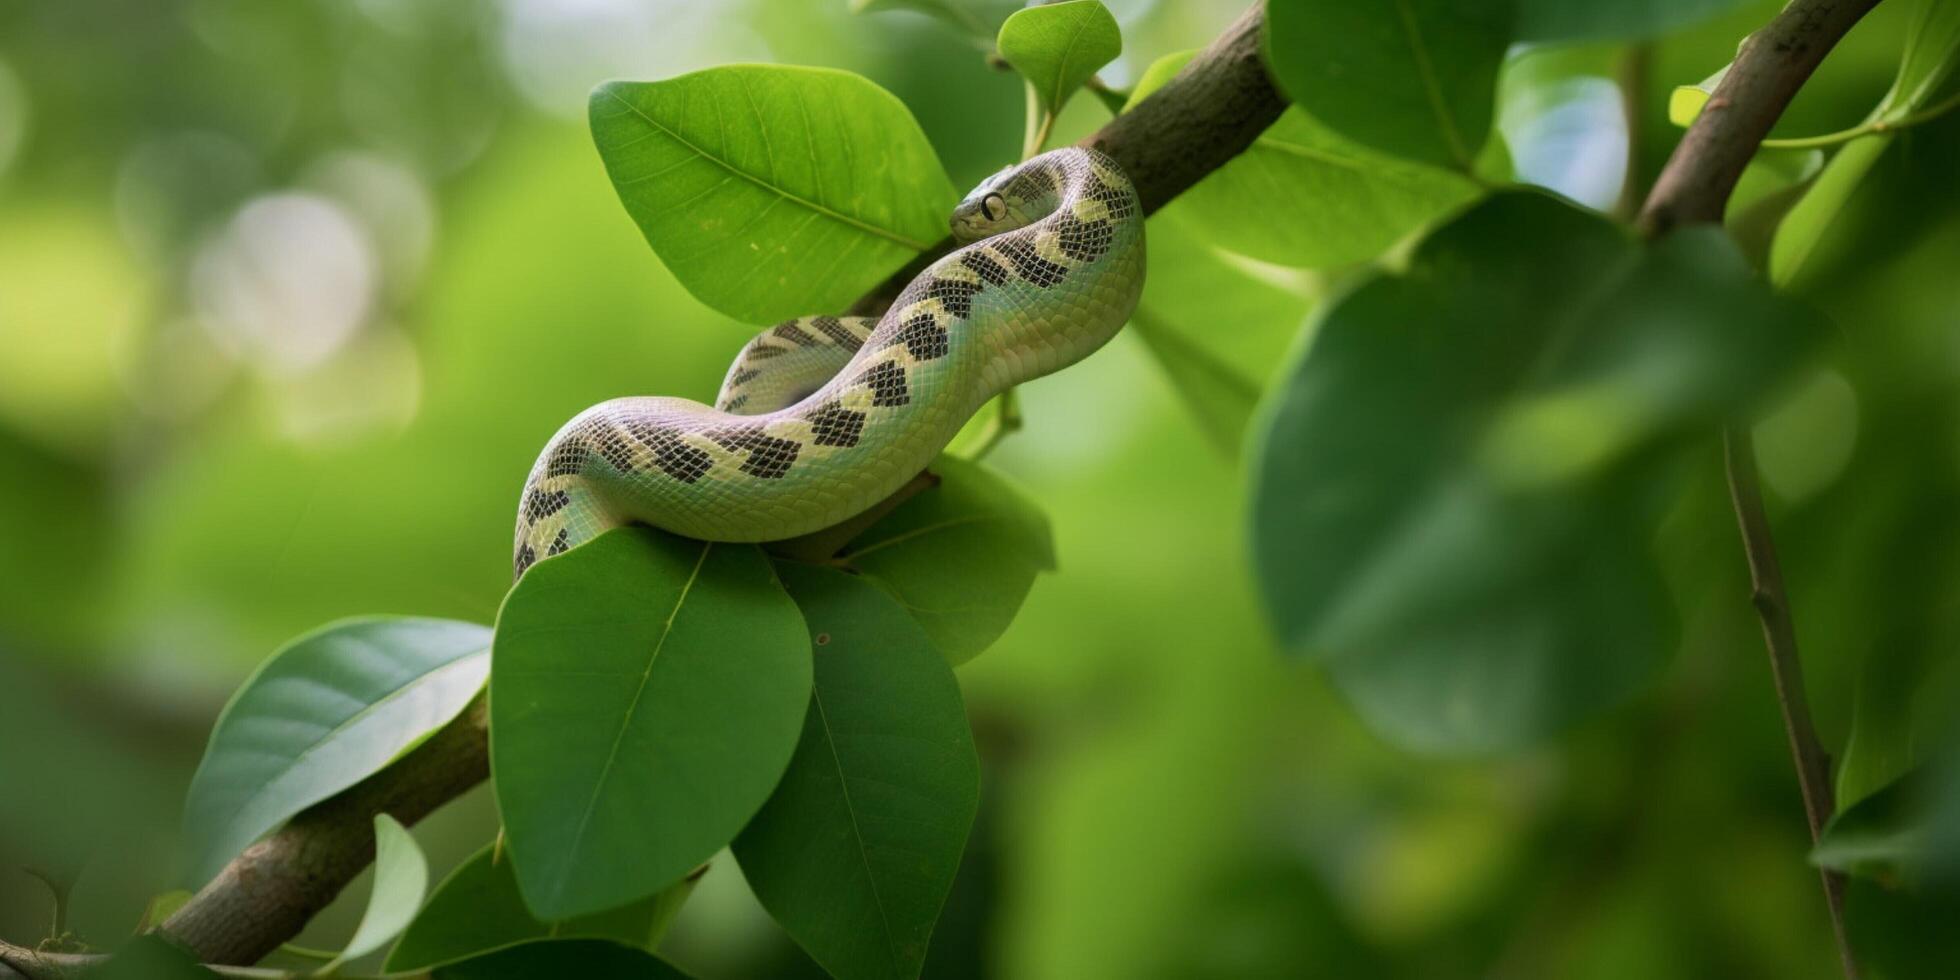 Snake on tree branch with green leaves photo